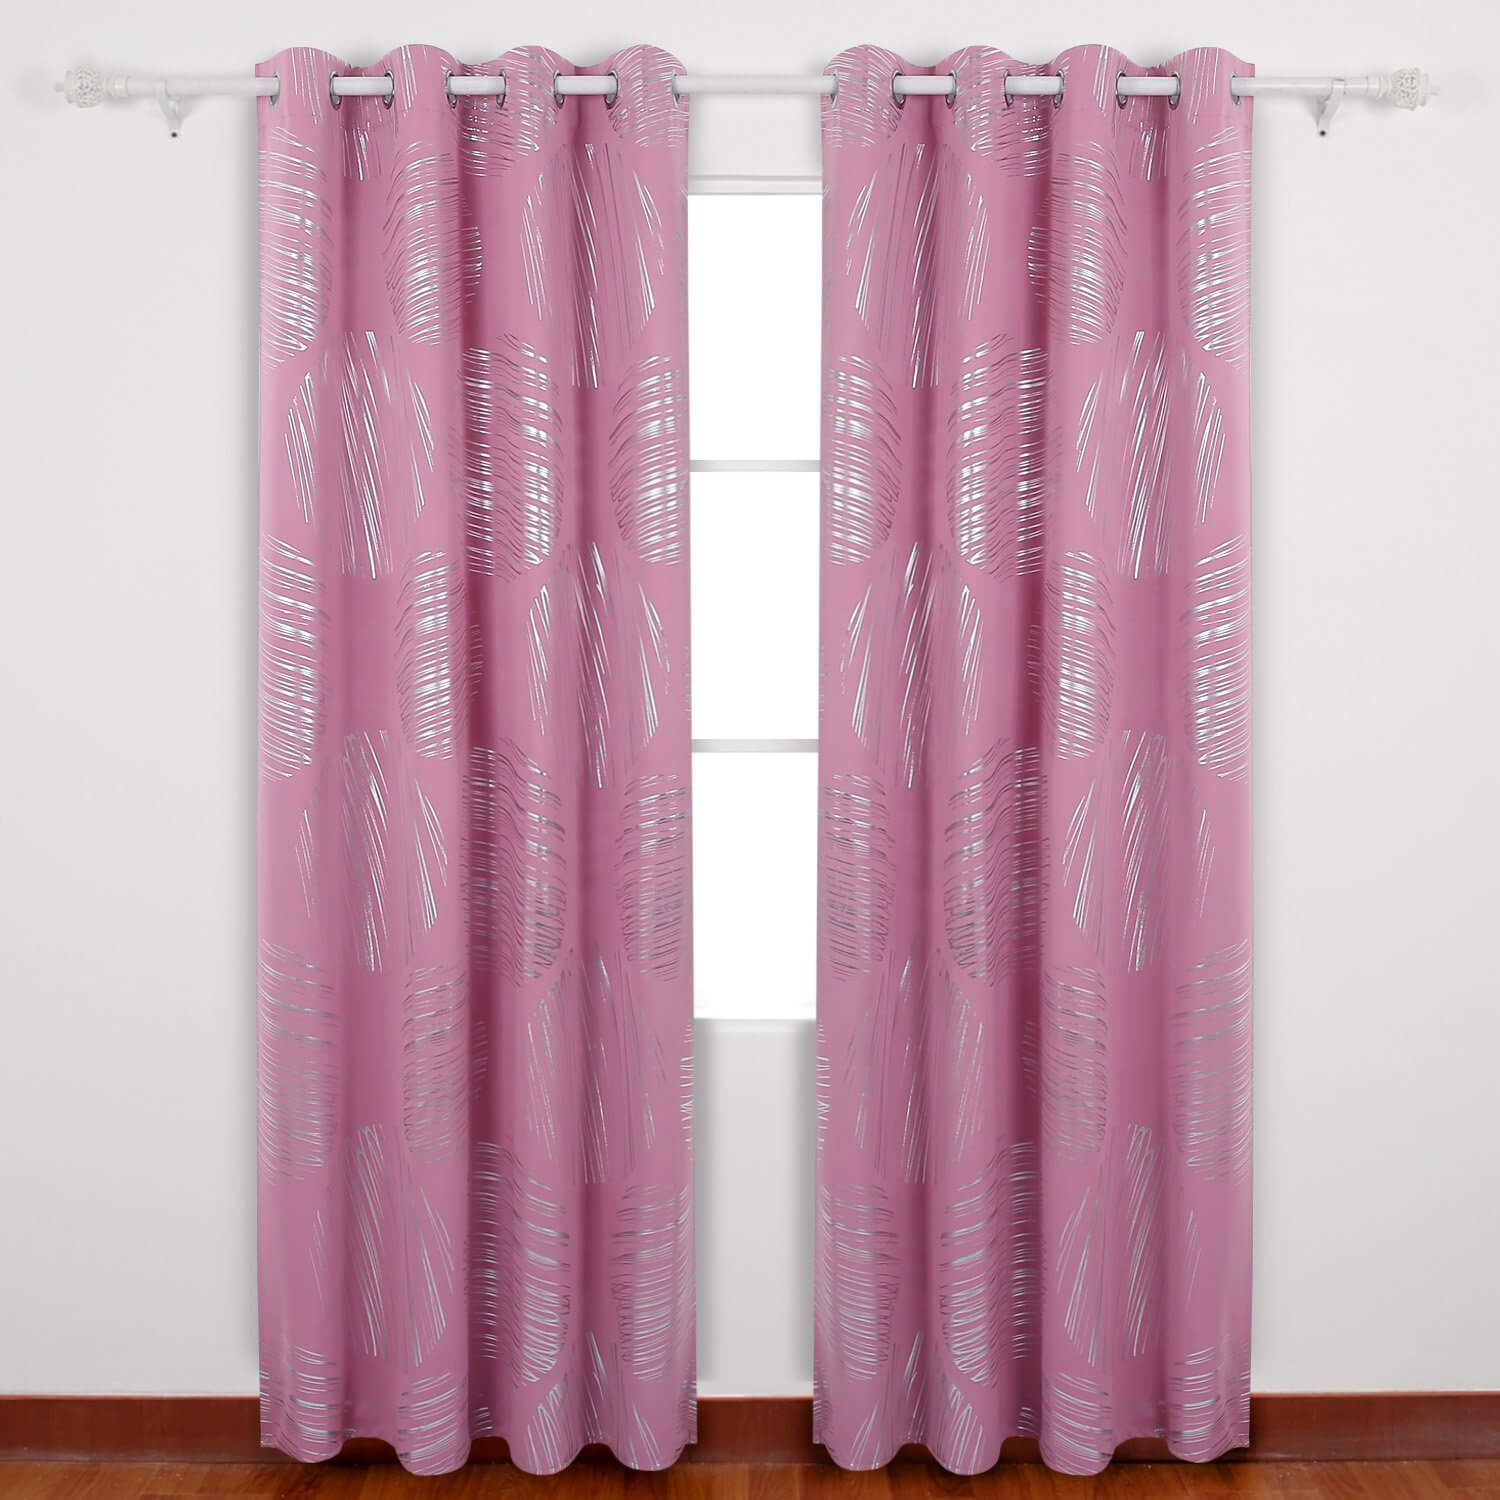 Deconovo Shimmering Circle Pattern Silver Foil Curtain Thermal Blackout Curtains Insulated Curtains and Drapes for Bedroom